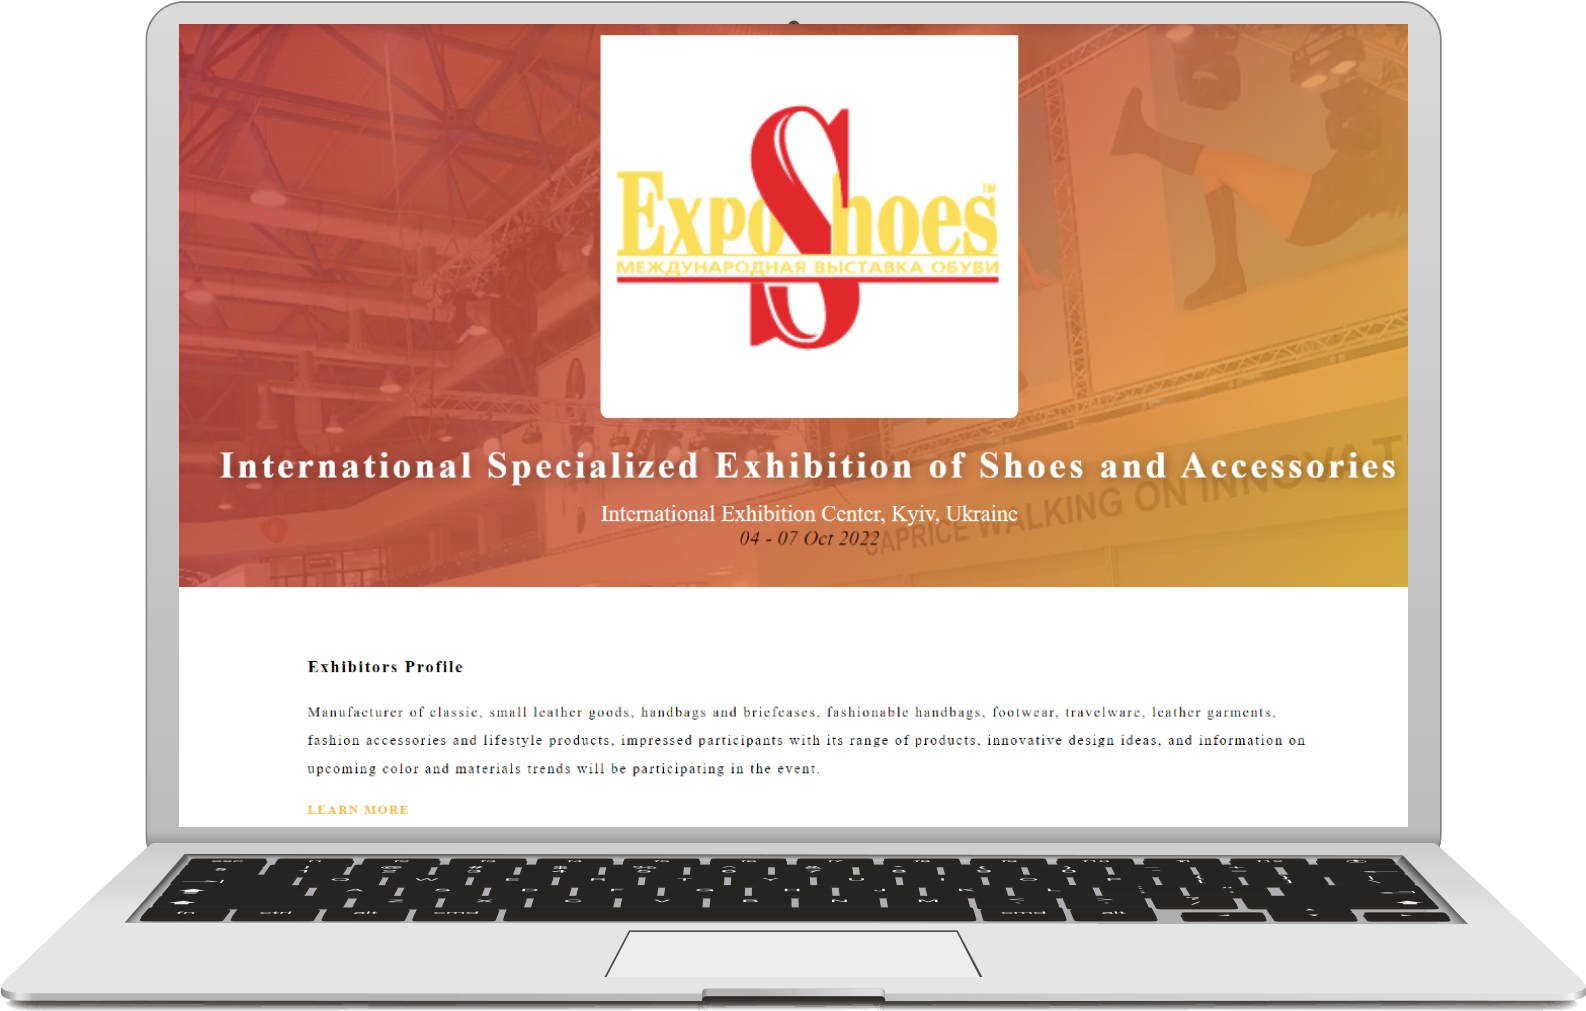 the page is about exhibition of shoes and accessories